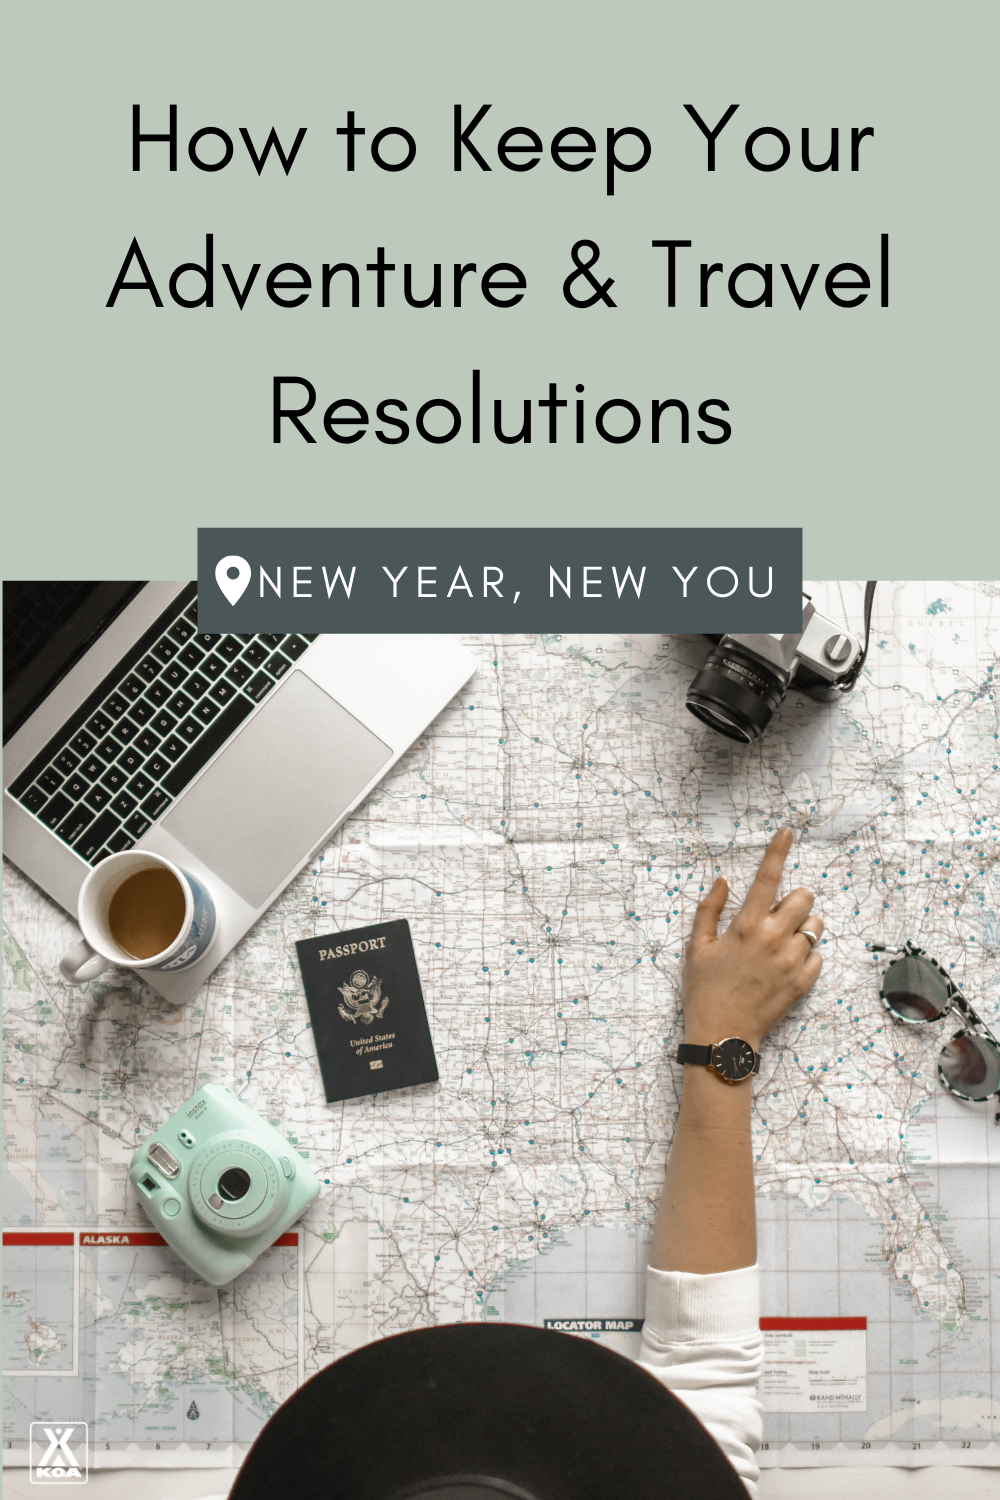 We think "travel more" is the perfect New Year's resolution and we've got just what you need to stick to it! Use these tips to get the most out of your adventure and travel resolutions.